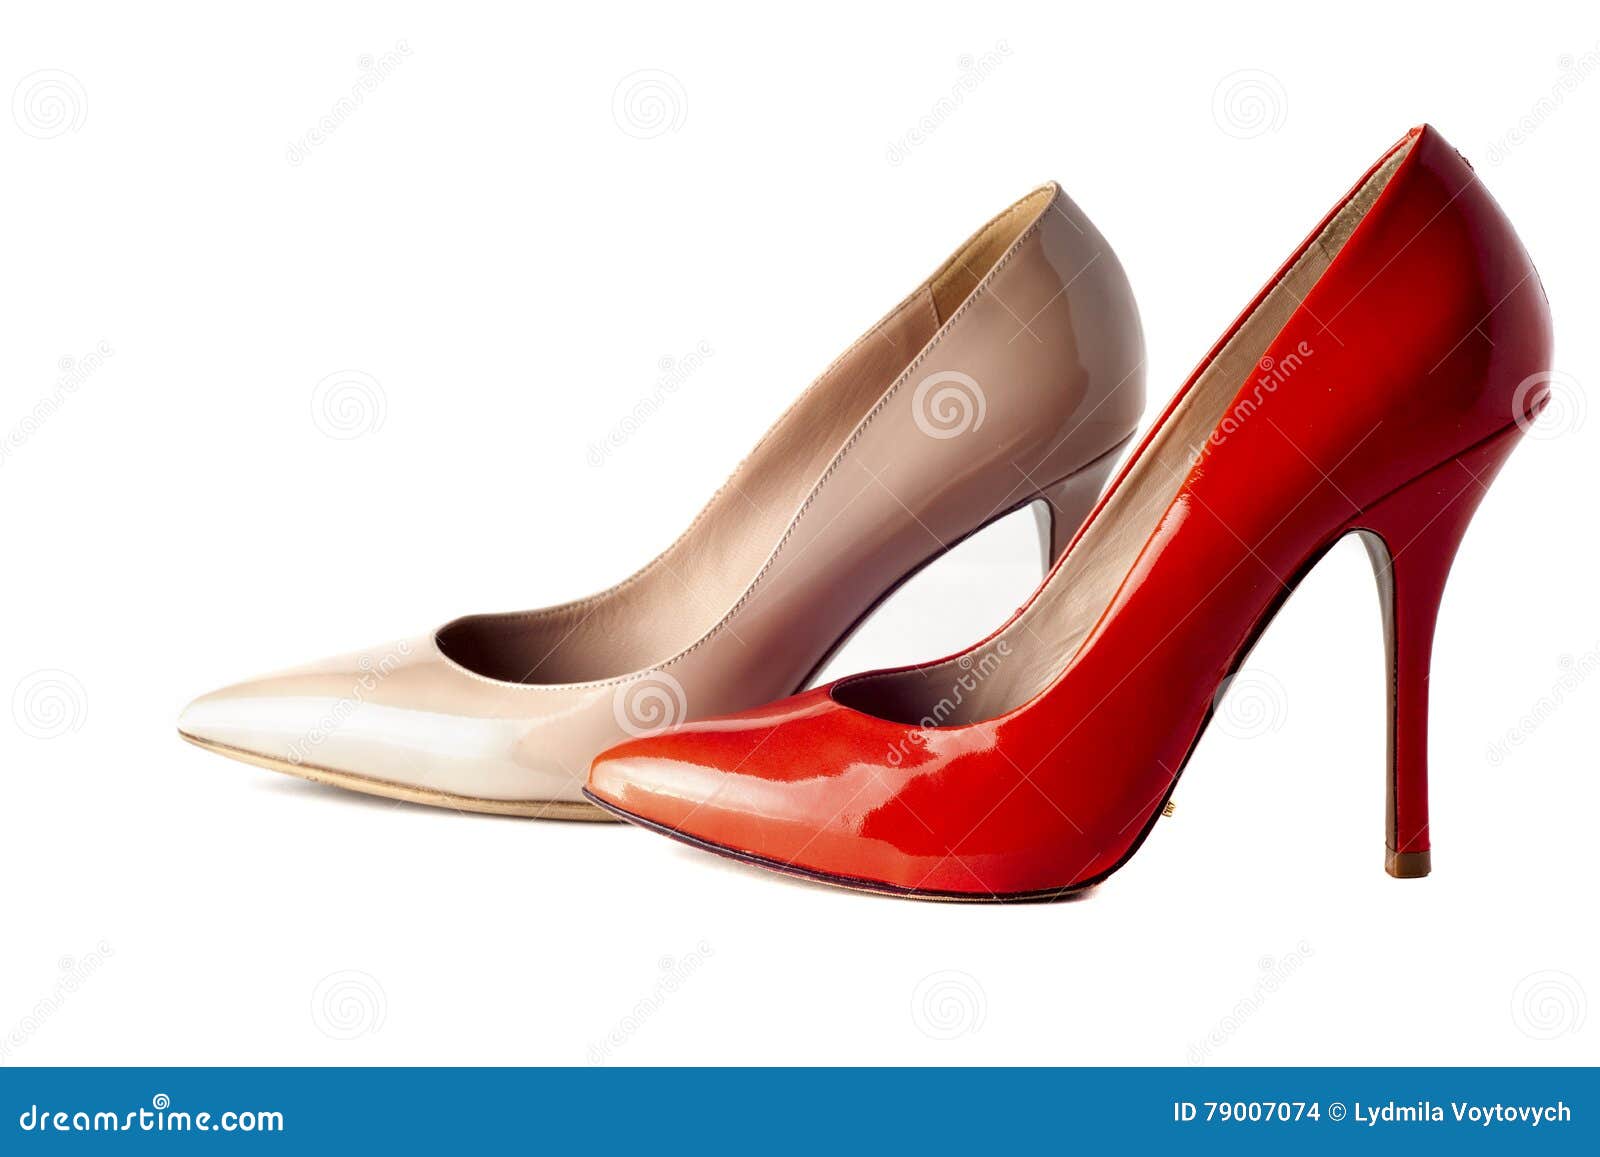 Bright, Multicolored Female Shoes on High Heels Stock Photo - Image of ...